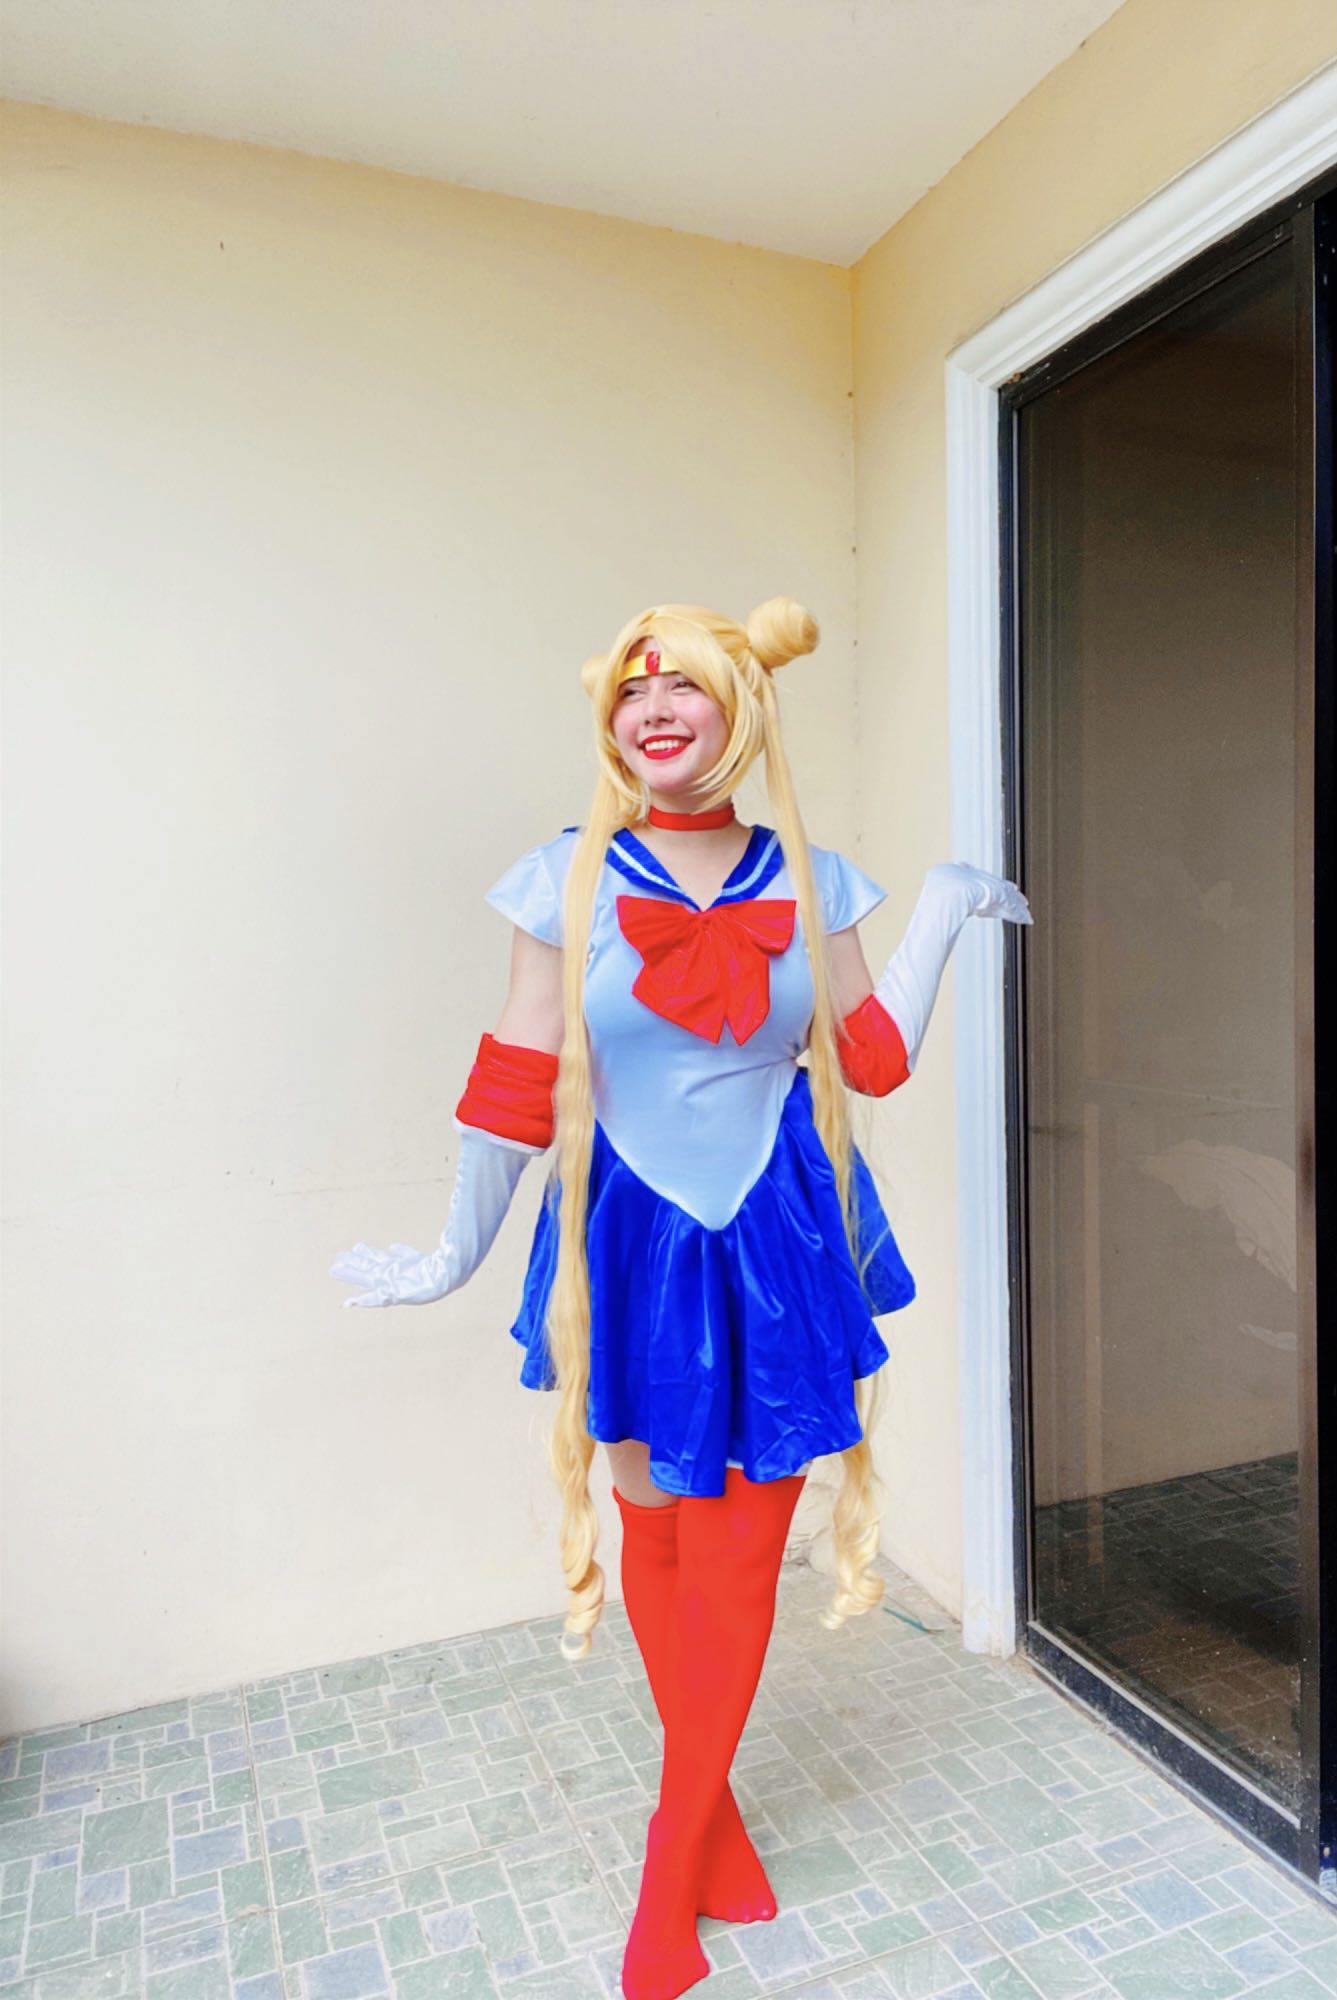 SAILOR MOON DRESS COSTUME FOR SALE WITH WIG!, Women's Fashion